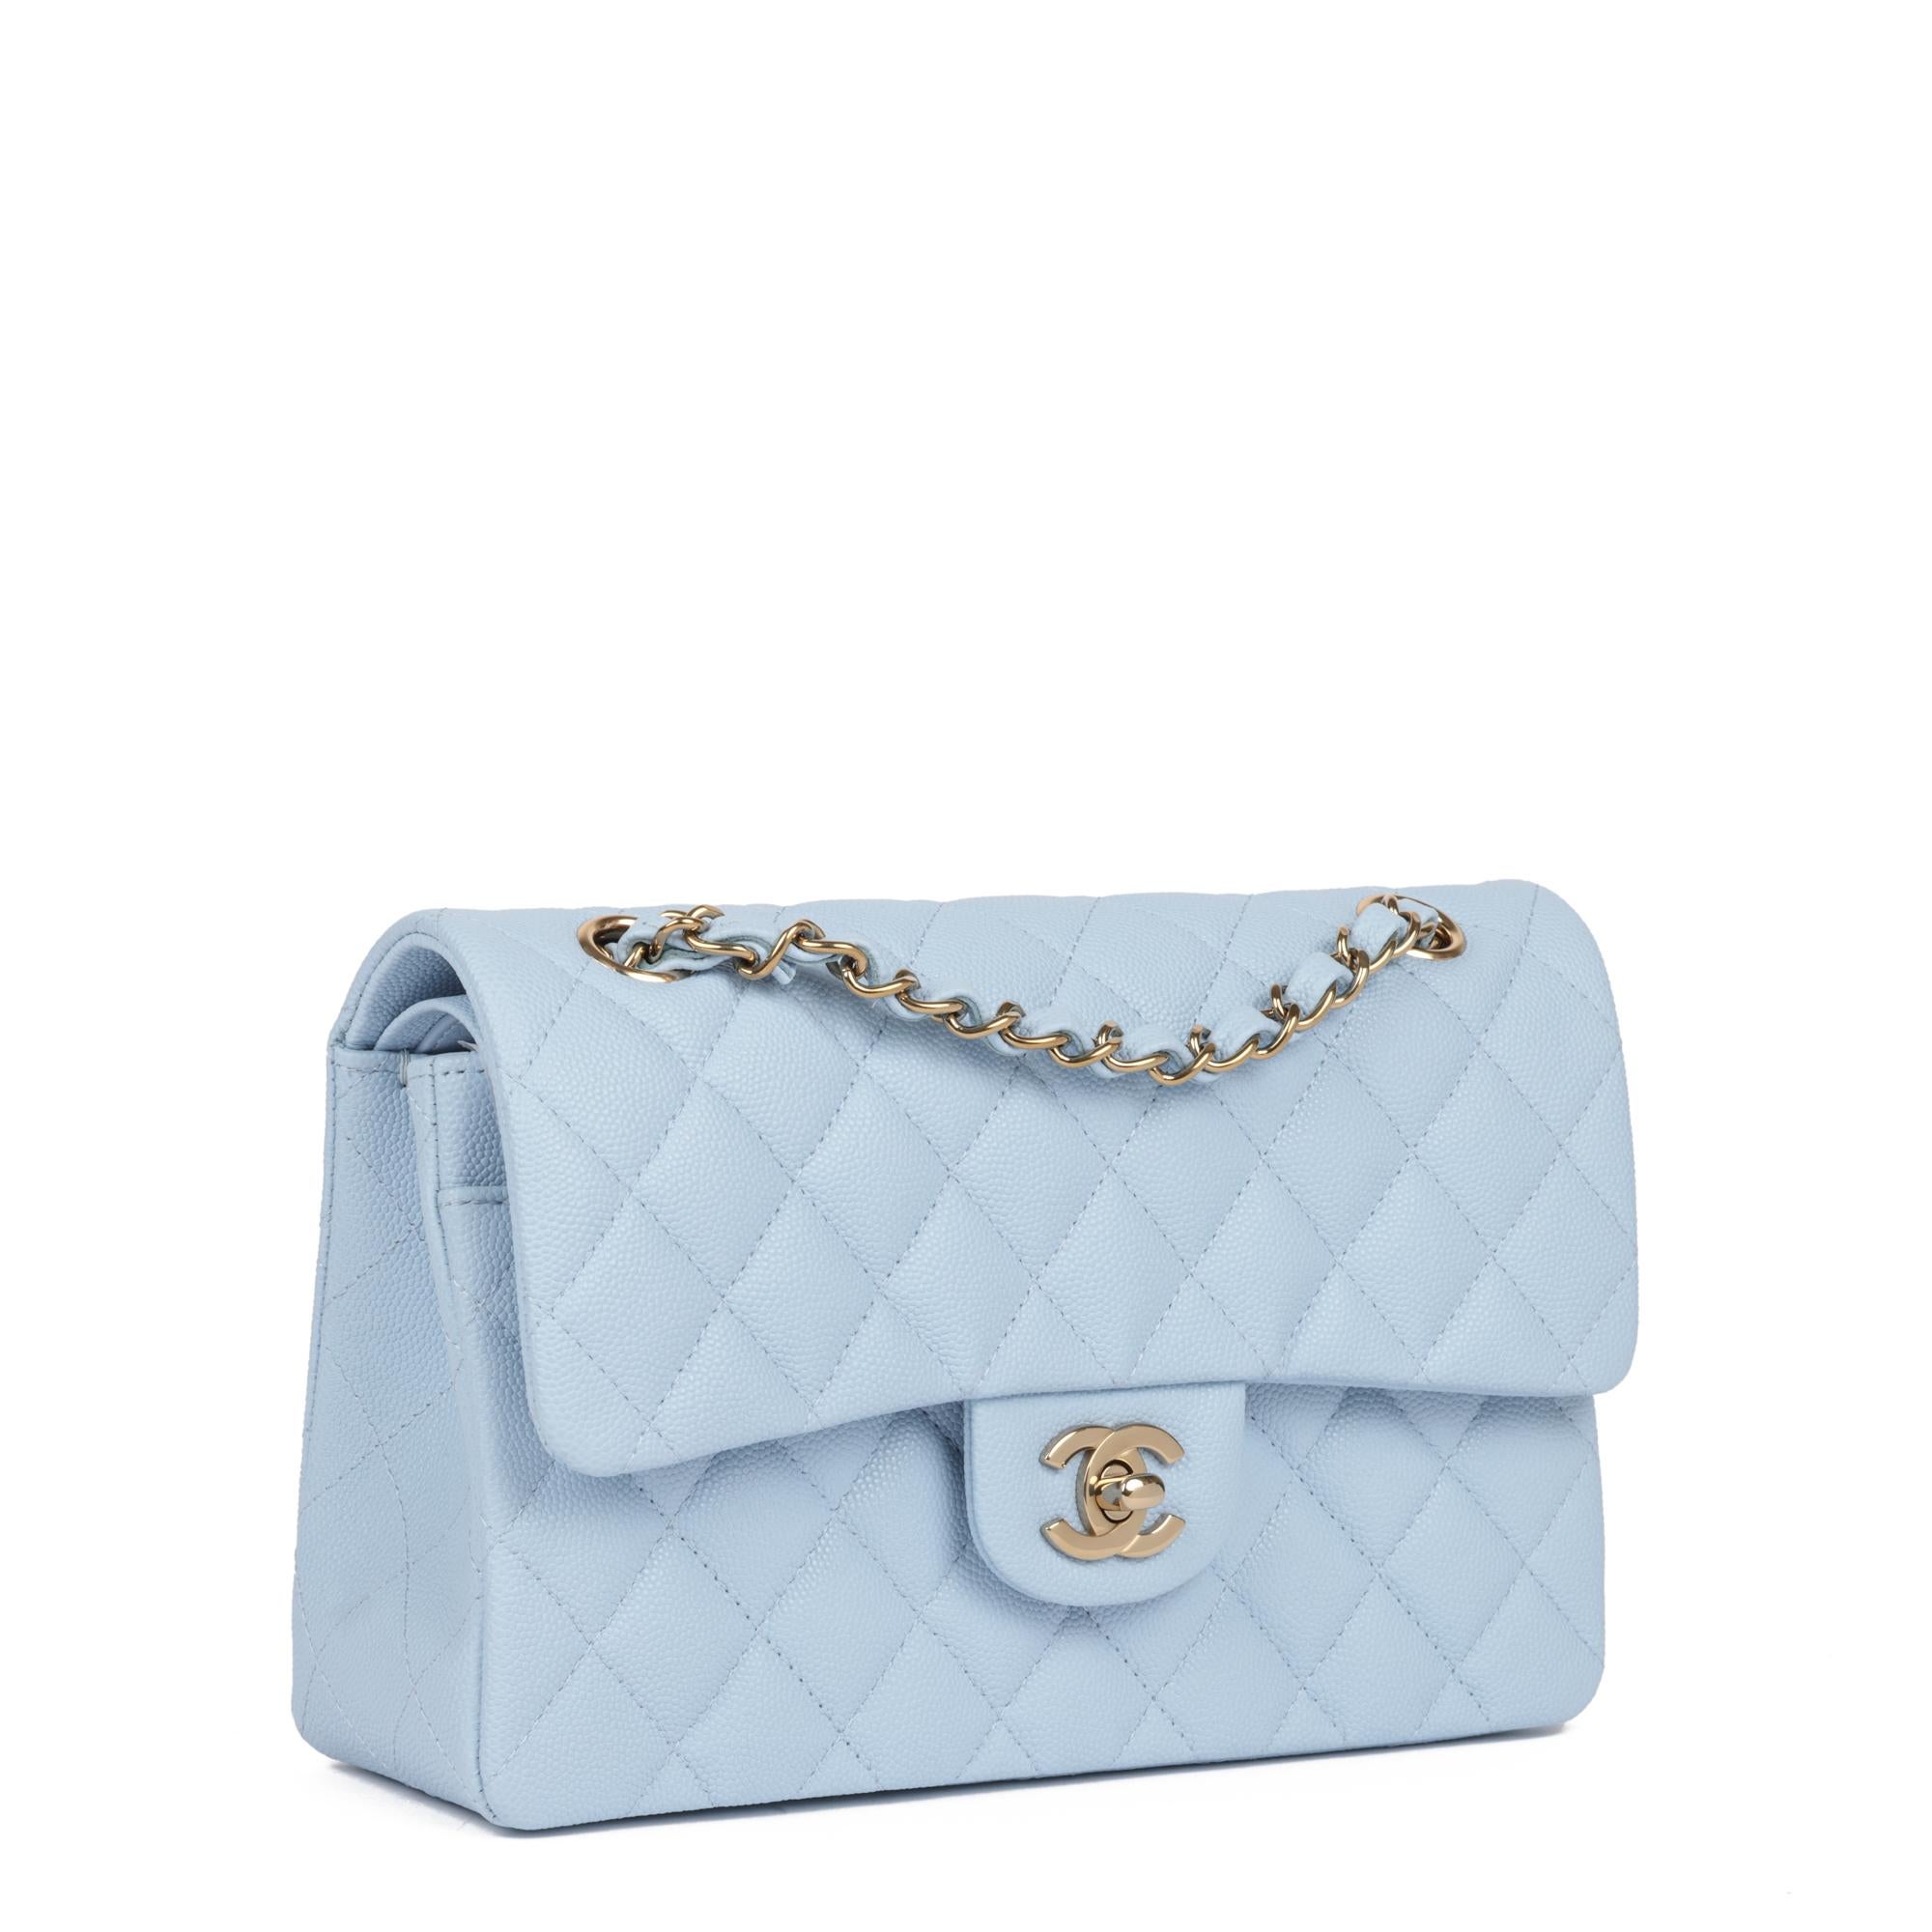 Chanel Light Blue Quilted Caviar Leather Small Classic Double Flap Bag

CONDITION NOTES
The exterior is exceptional condition with no signs of use.
The interior is in exceptional condition with no signs of use.
The hardware is in exceptional